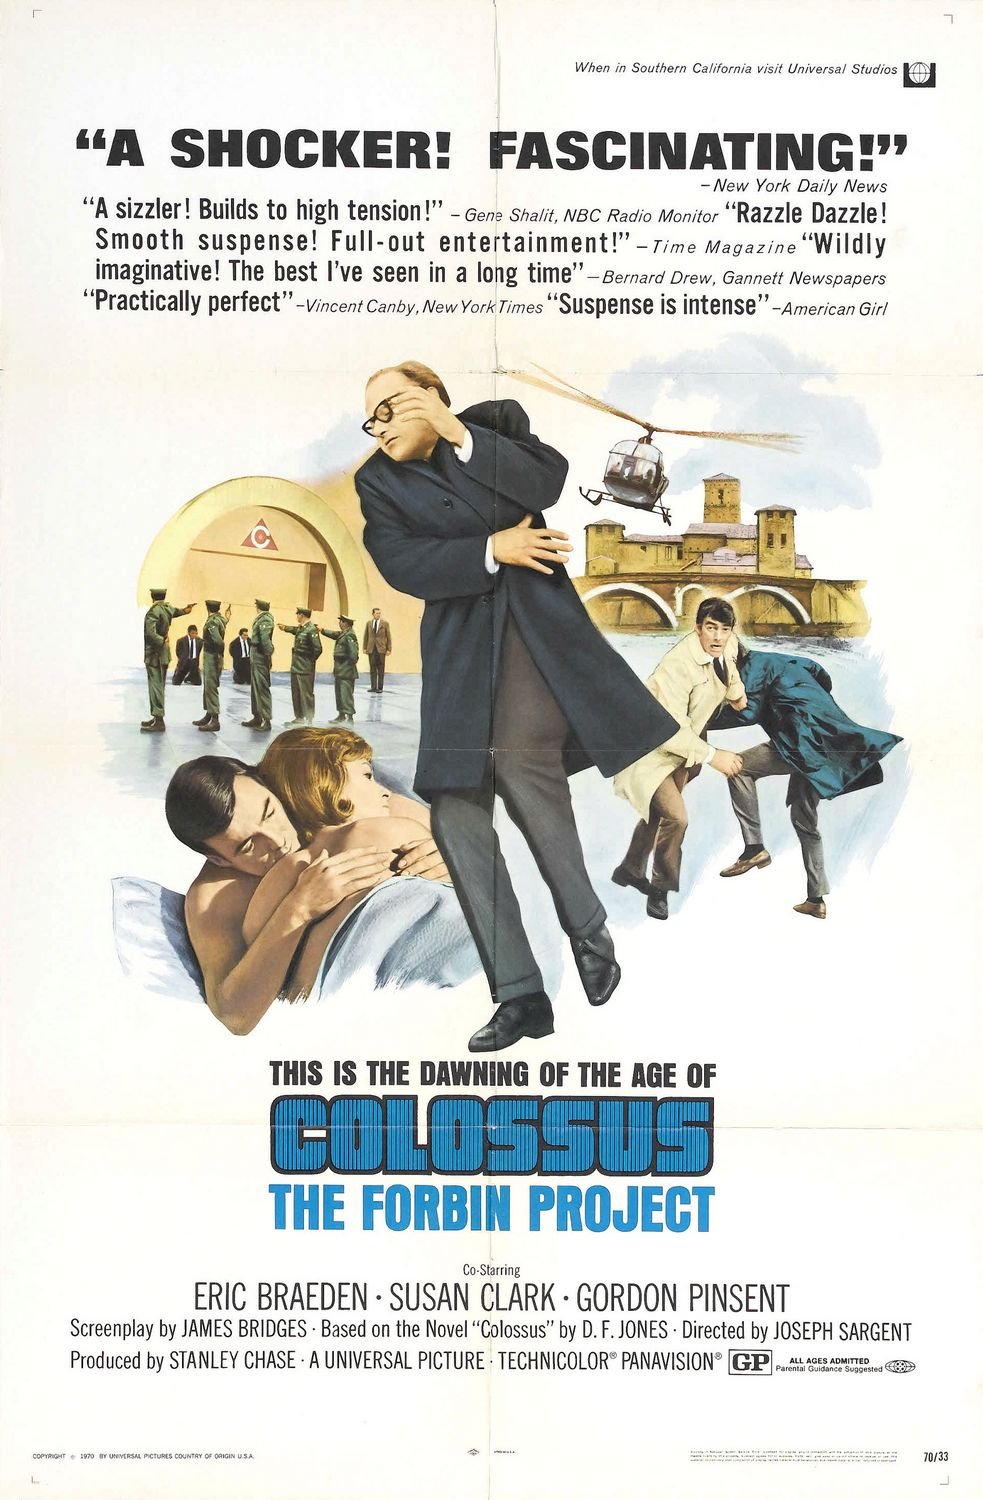 Poster of the movie Colossus: The Forbin Project